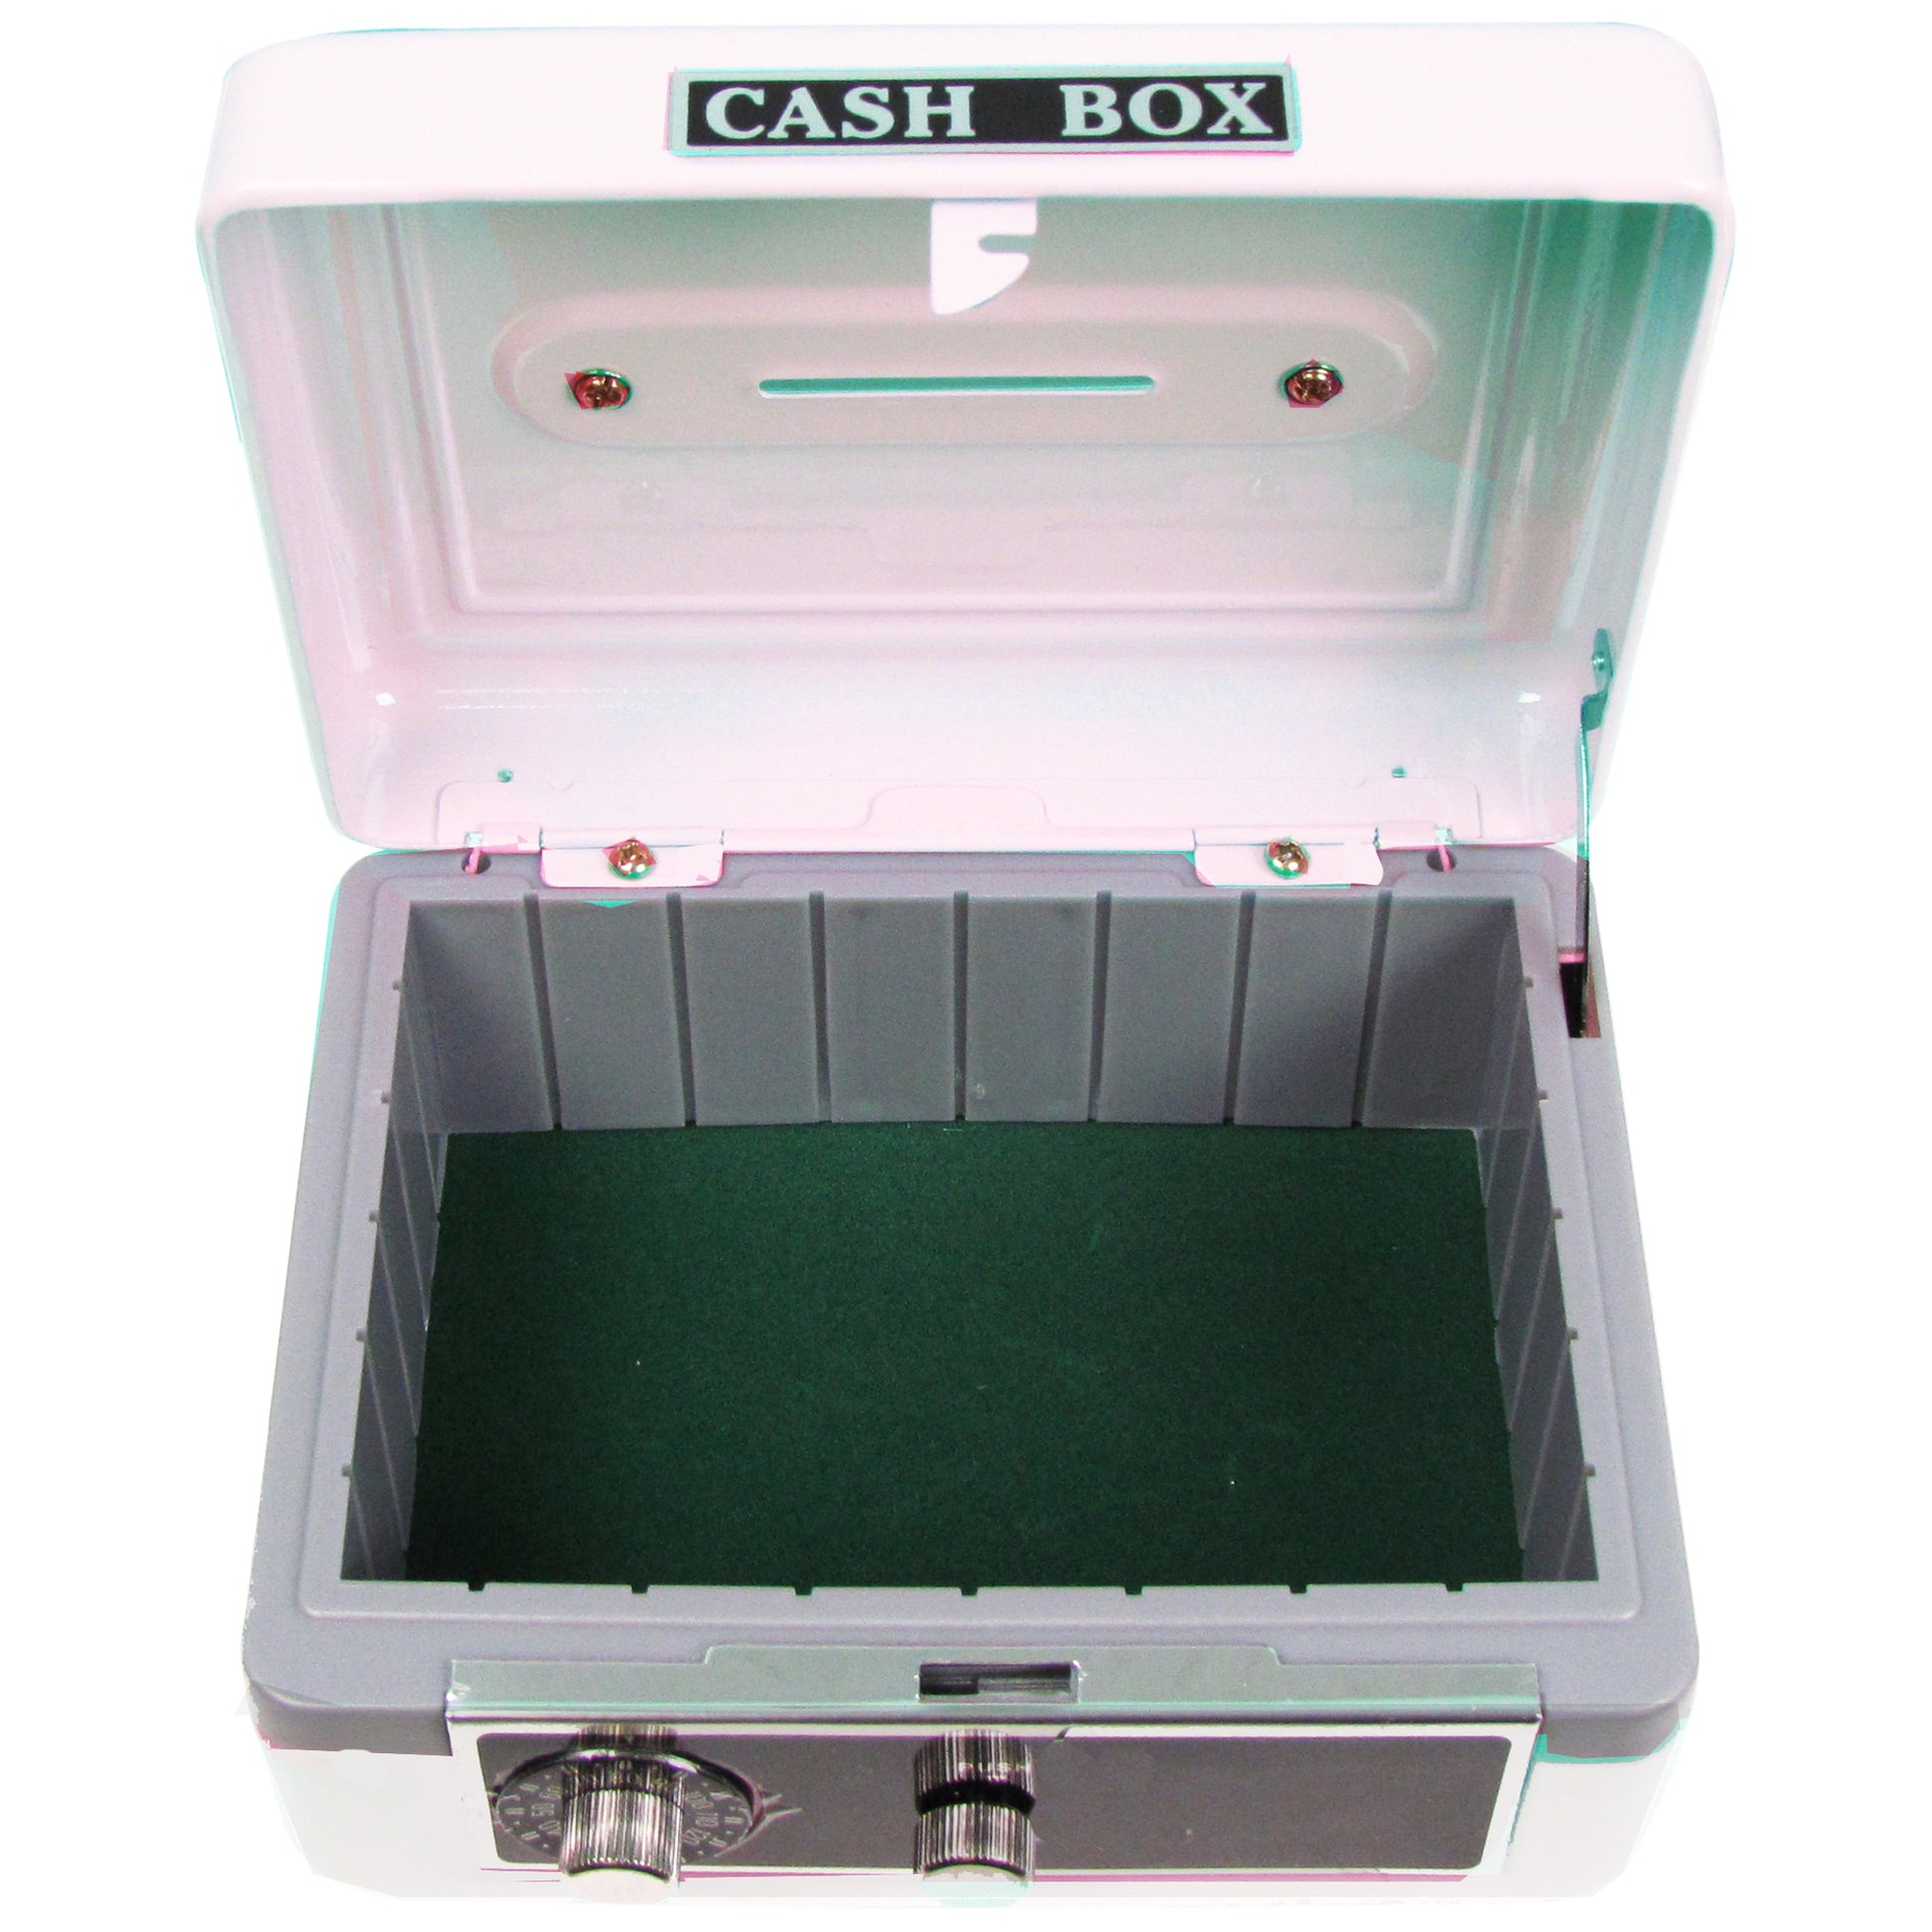 Personalized White Cash Box with Red Tractor design